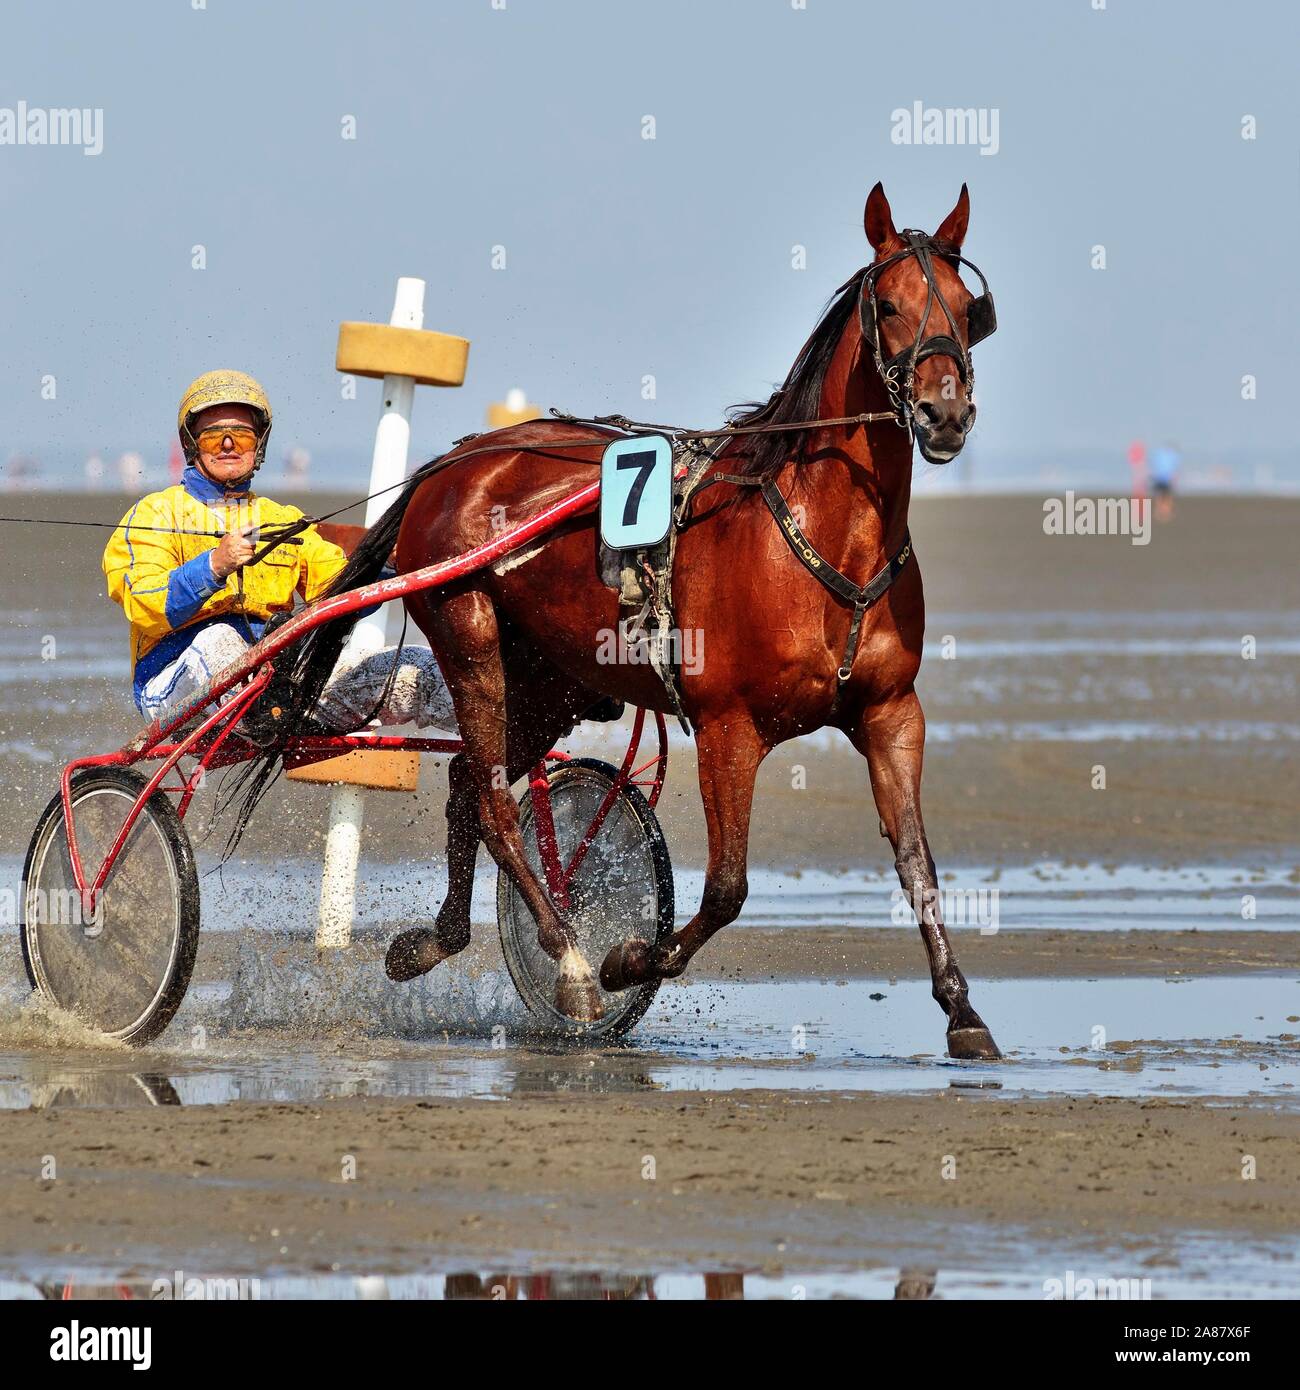 Horse and rider in Sulky, Trotter, Duhne mudflat race, Cuxhaven, Lower Saxony, Germany Stock Photo